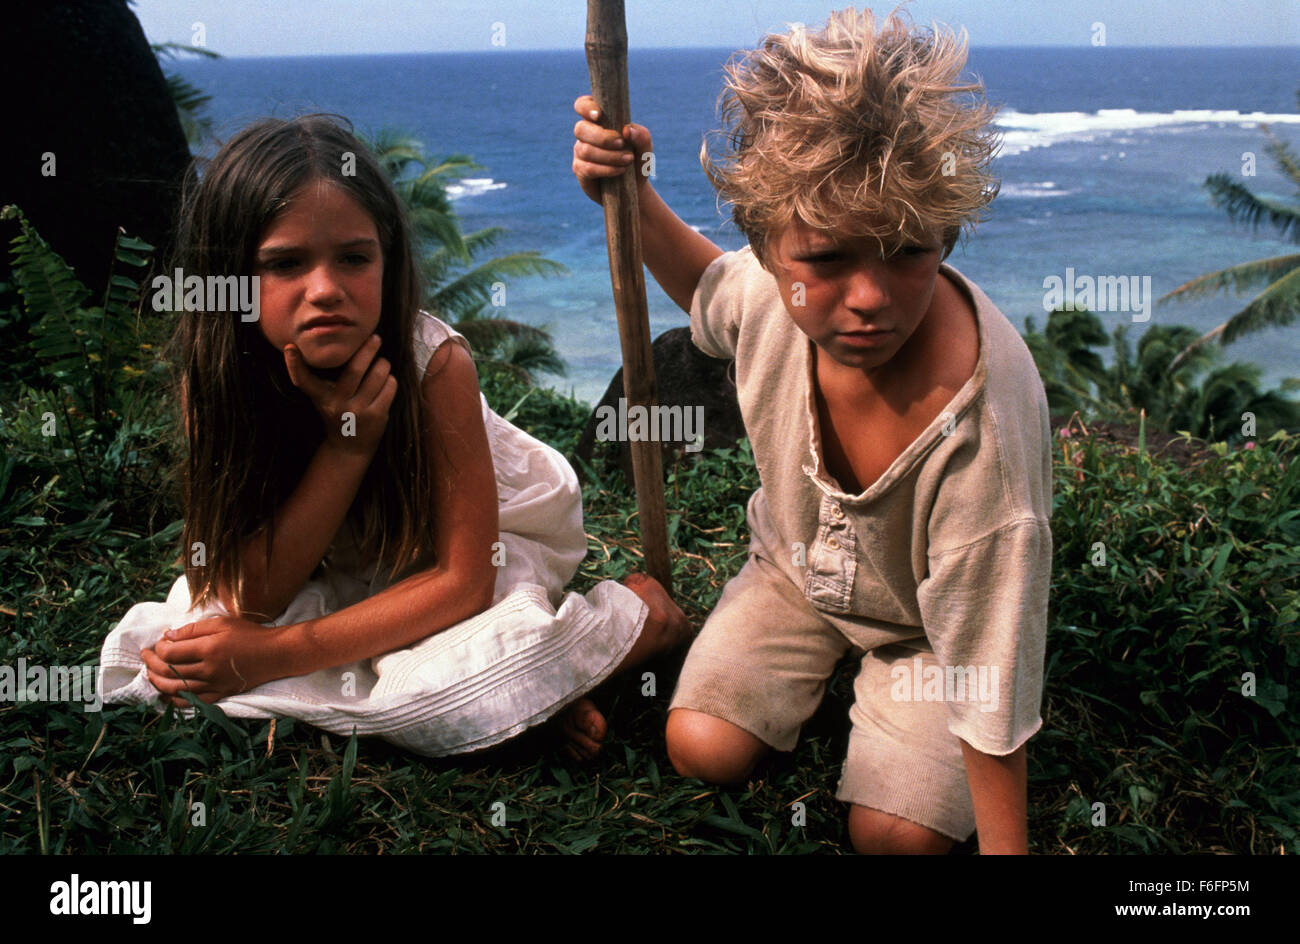 RELEASE DATE: August 2, 1991 . MOVIE TITLE: Return To The Blue Lagoon. STUDIO: Columbia Pictures. PLOT: A new generation is shipwrecked again on the desert island. This time the two kids, Richard and Lilli, have no experience in the civilized world at all, and have to discover everything on their own, but love proves an indomitable instinct, even given a 'choice' of one inhabitant per gender. PICTURED: Lilli and Richard as youngsters Stock Photo